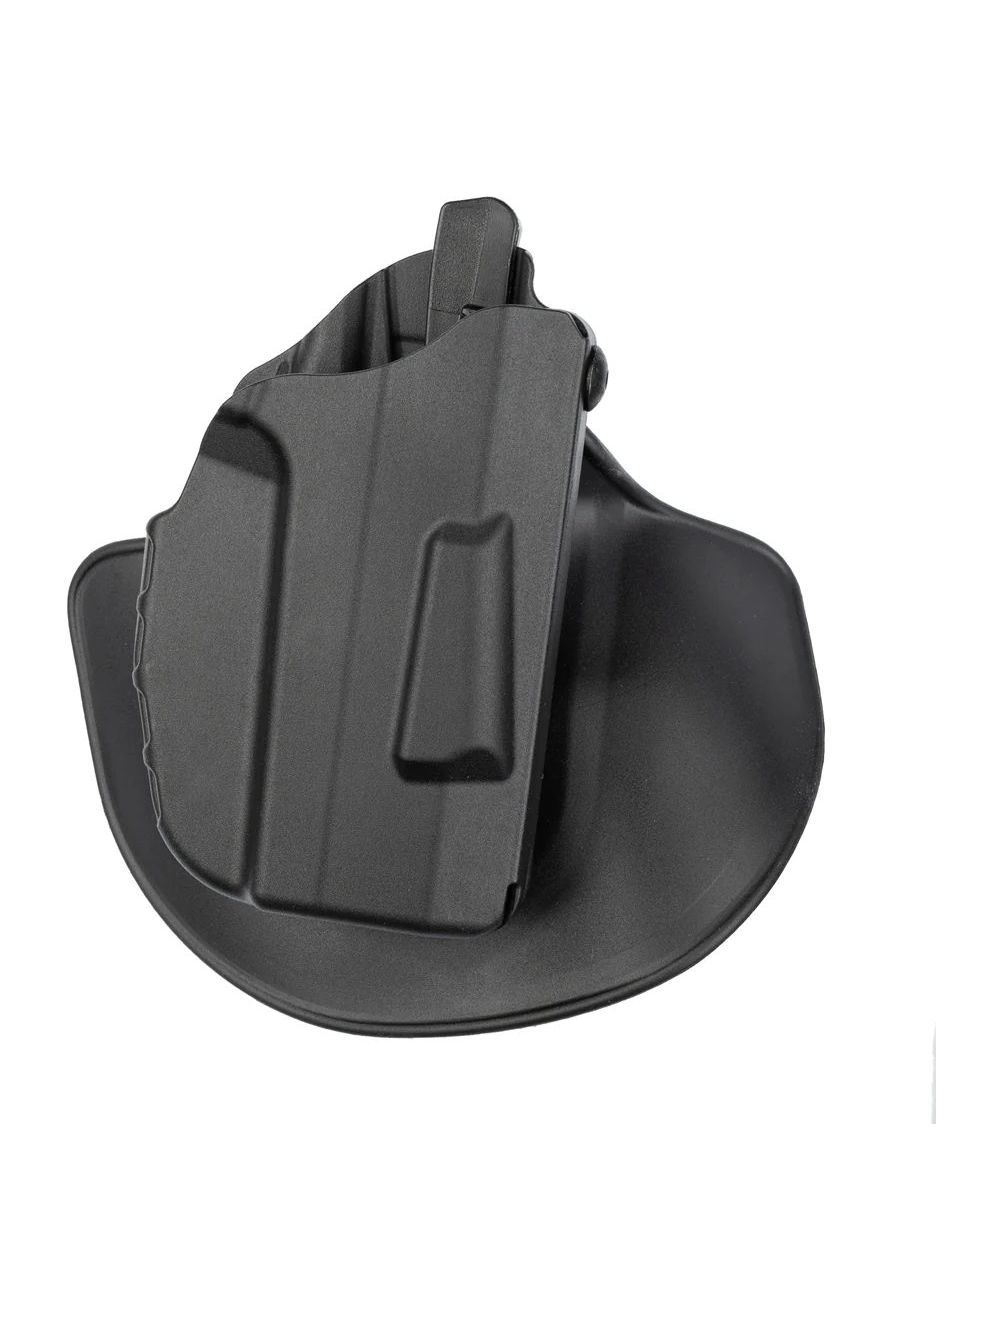 Model 7378 7TS ALS Concealment Paddle and Belt Loop Combo Holster for Glock 43